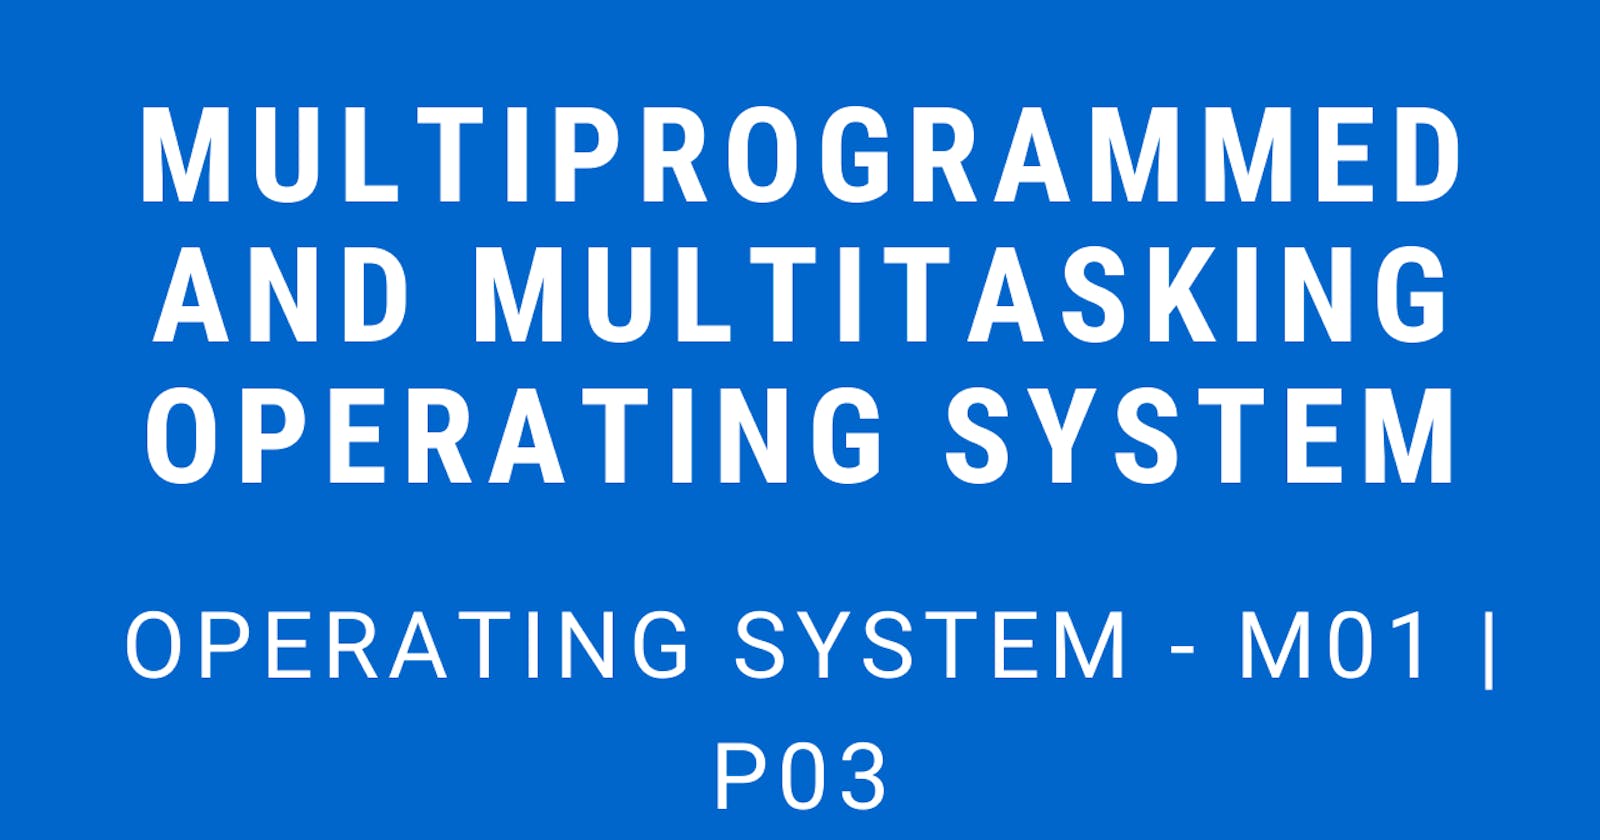 Multiprogrammed and Multitasking Operating System | Operating System - M01 P03